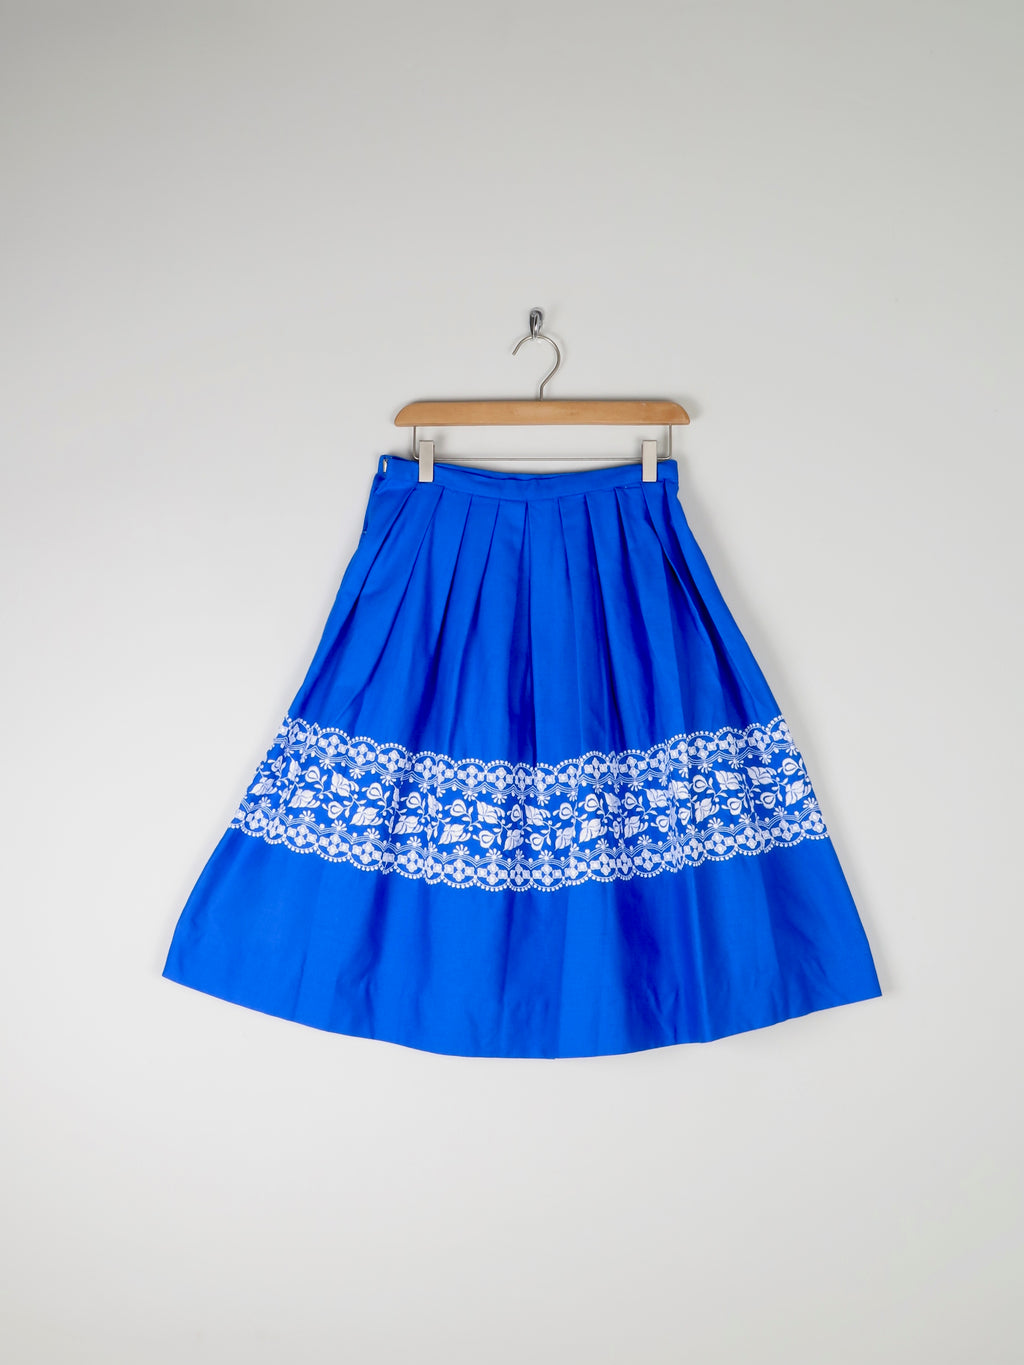 Electric Blue 1950s Circle Skirt 27/28 " - The Harlequin